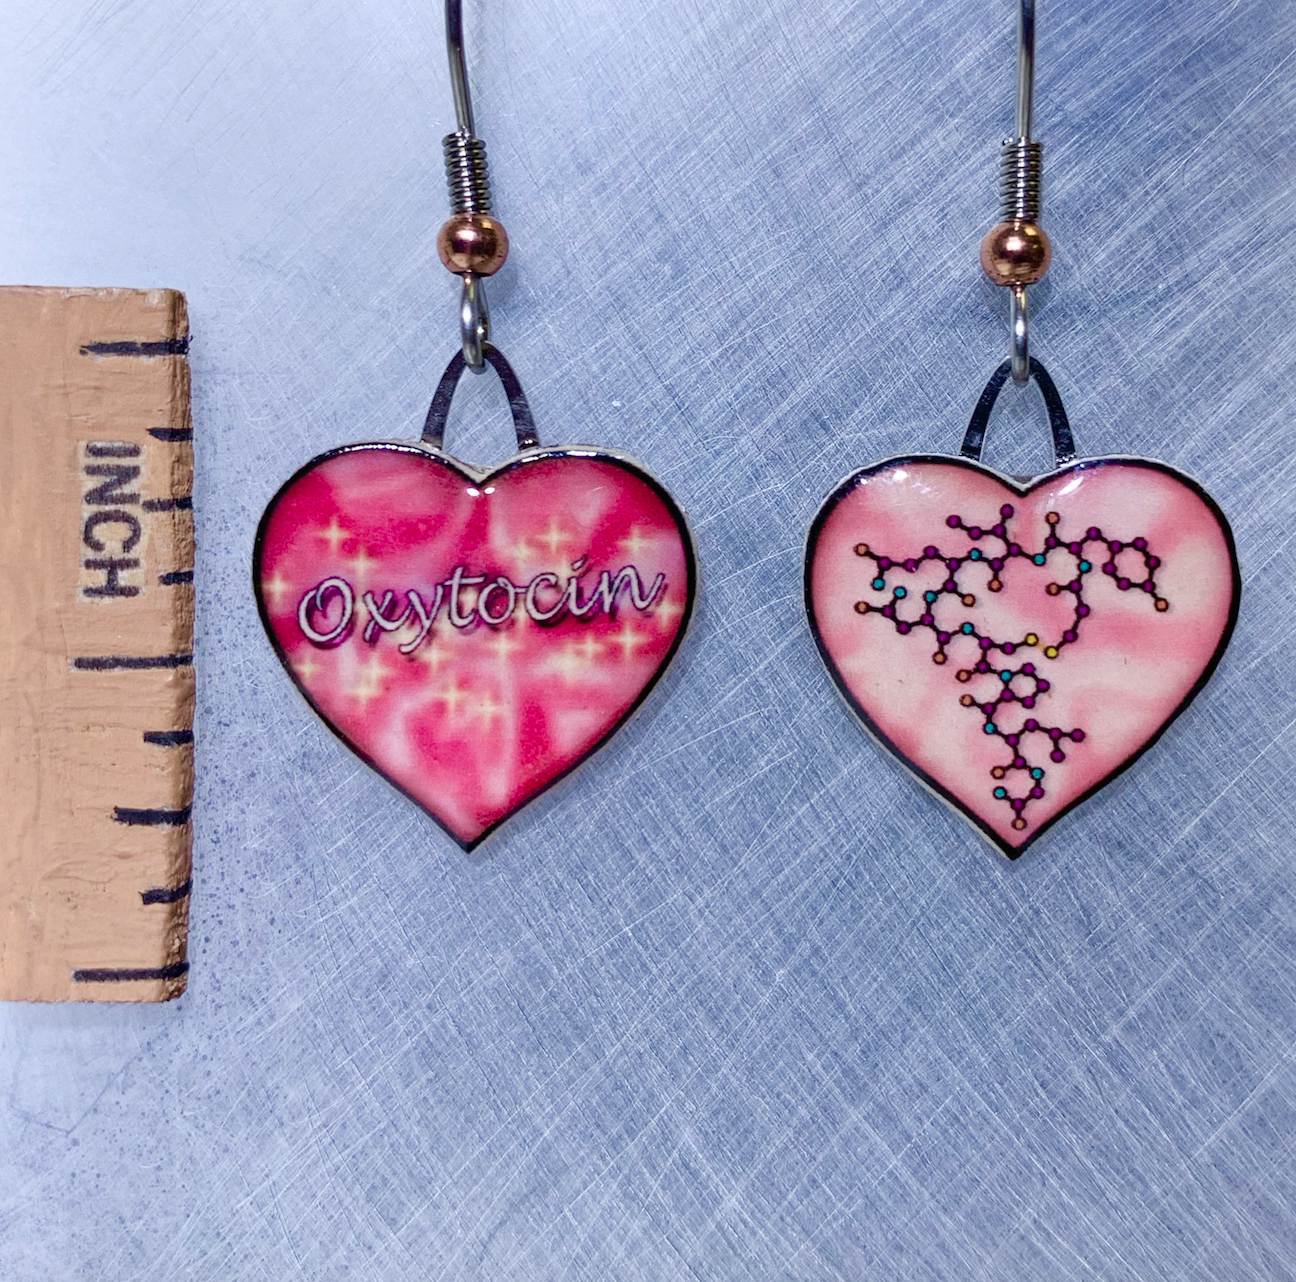 Picture shown is of 1 inch tall pair of earrings of Oxytocin.